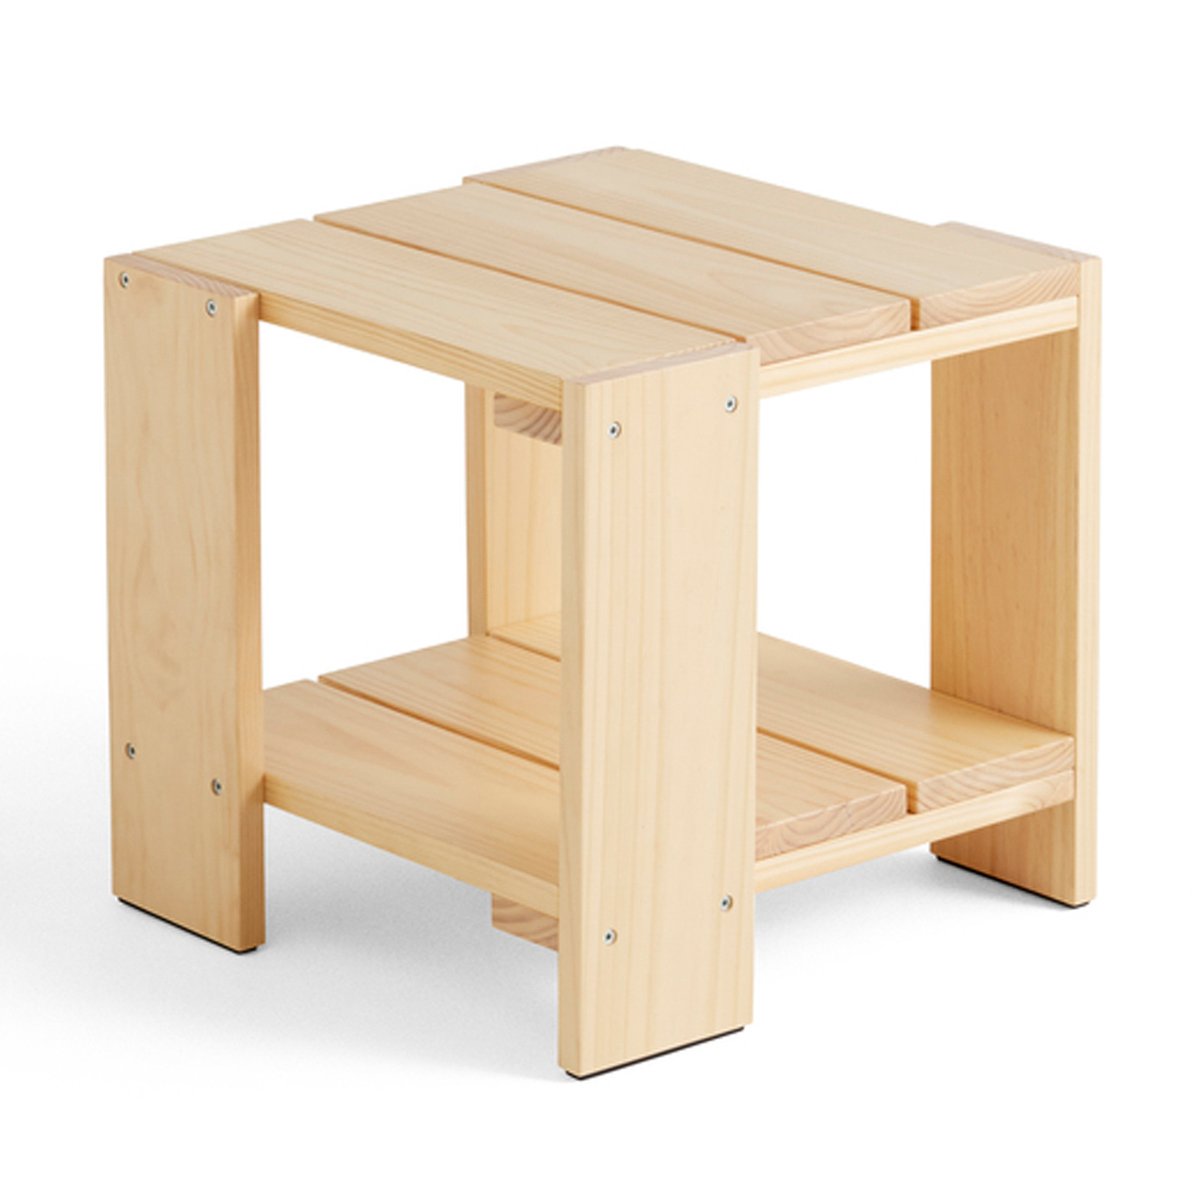 HAY Crate Side Table tafel 49,5x49,5x45 cm gelakt sparrenhout Water-based lacquered pinewood